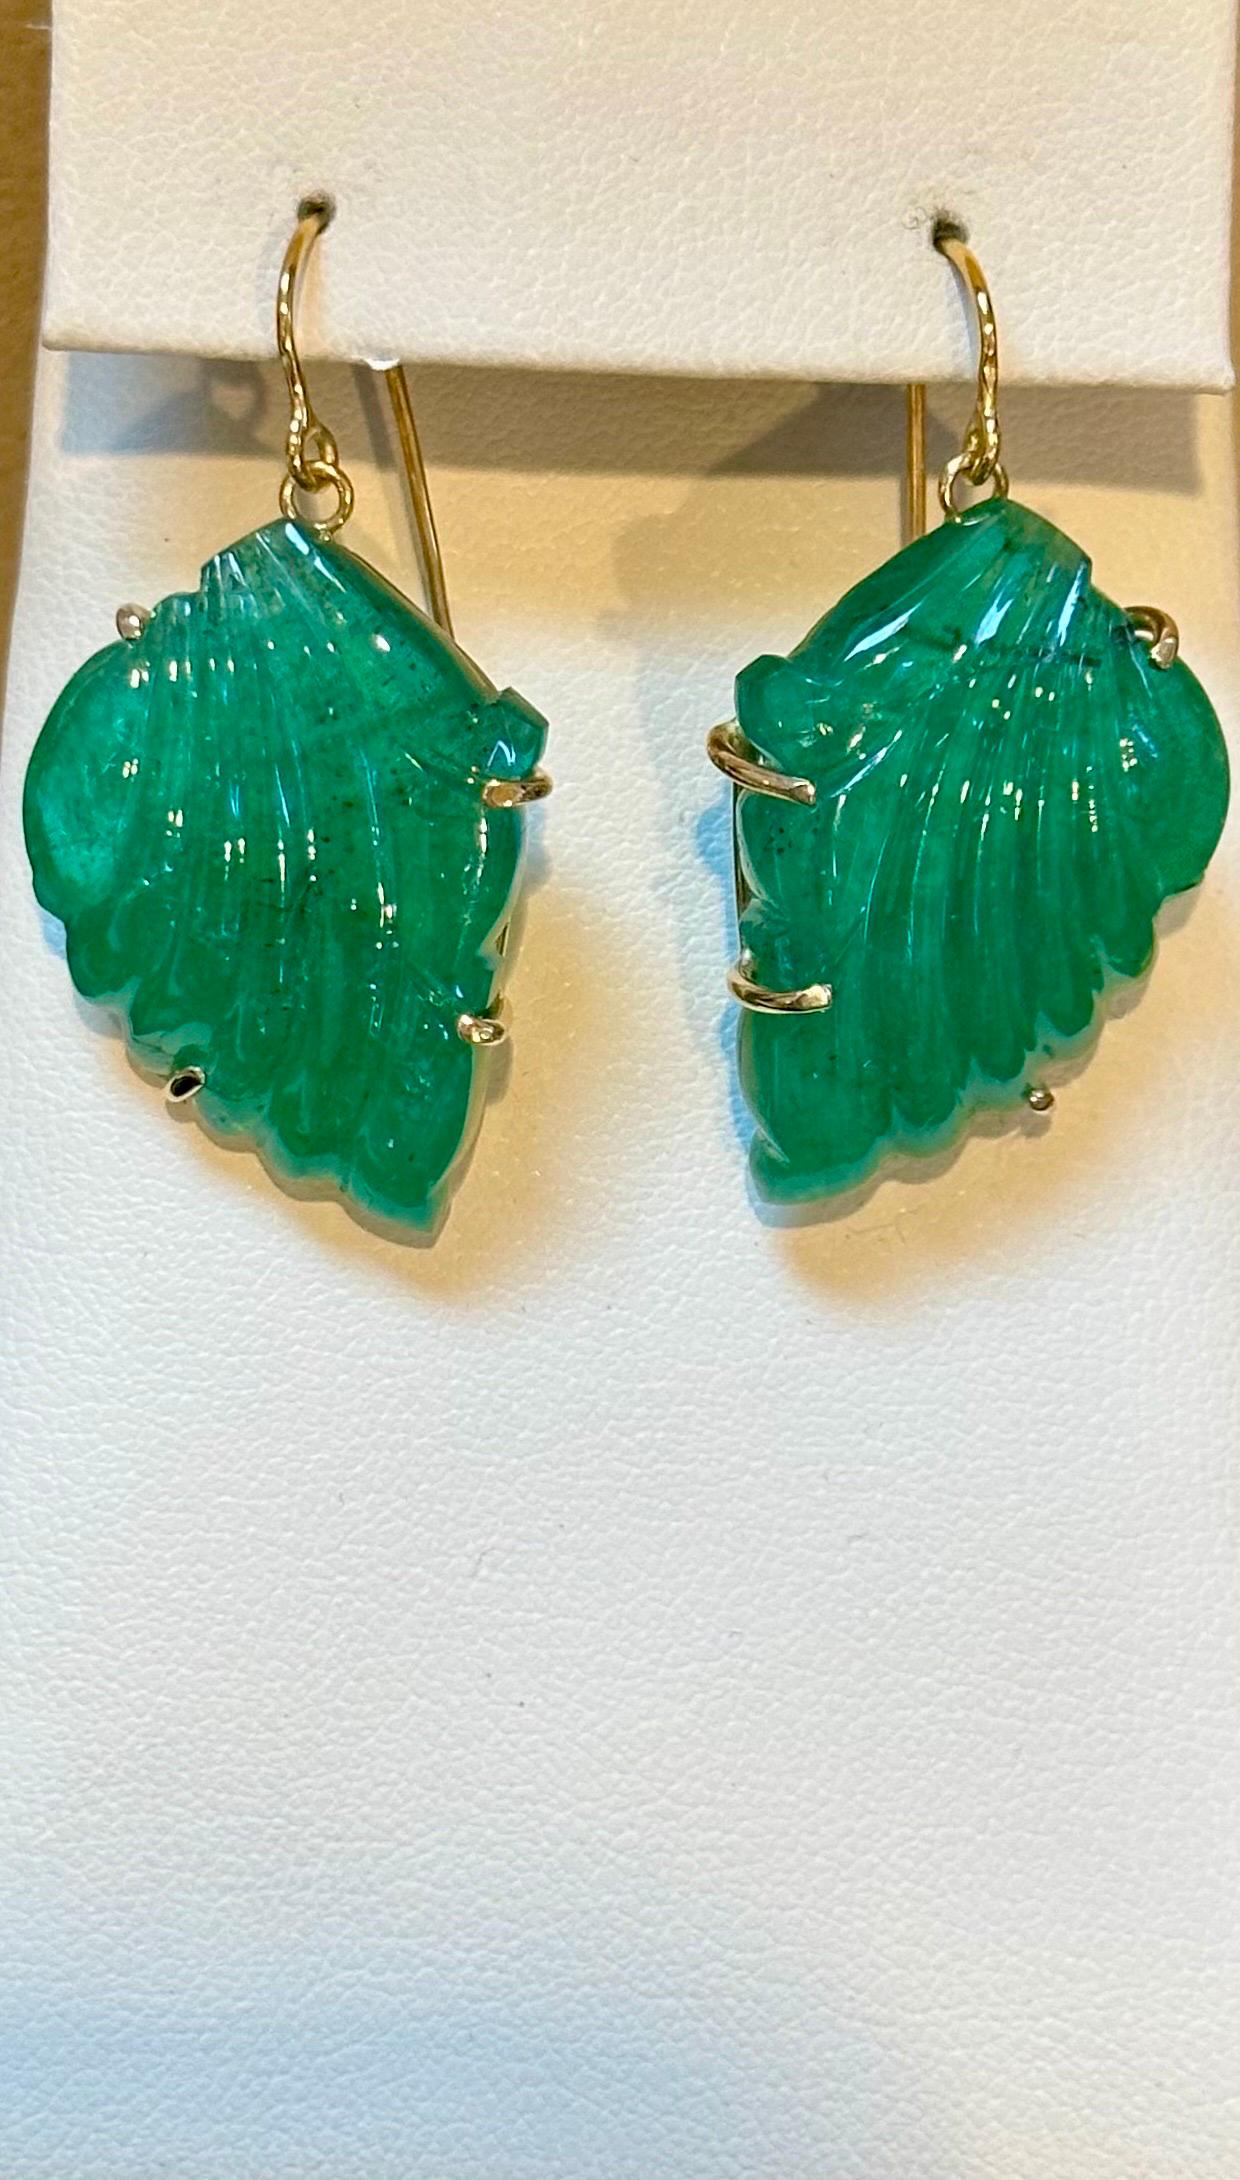 55 Ct Carved Emerald Leaf Shape Earrings 14 Kt Yellow Gold French Wire Earring
 Emerald    Post  Earrings  14 Karat  Yellow Gold wire
Two fine carved  leaf emeralds of total 55 ct  
Weight of 14 Karat gold with stone is 12.4 gm
This exquisite pair